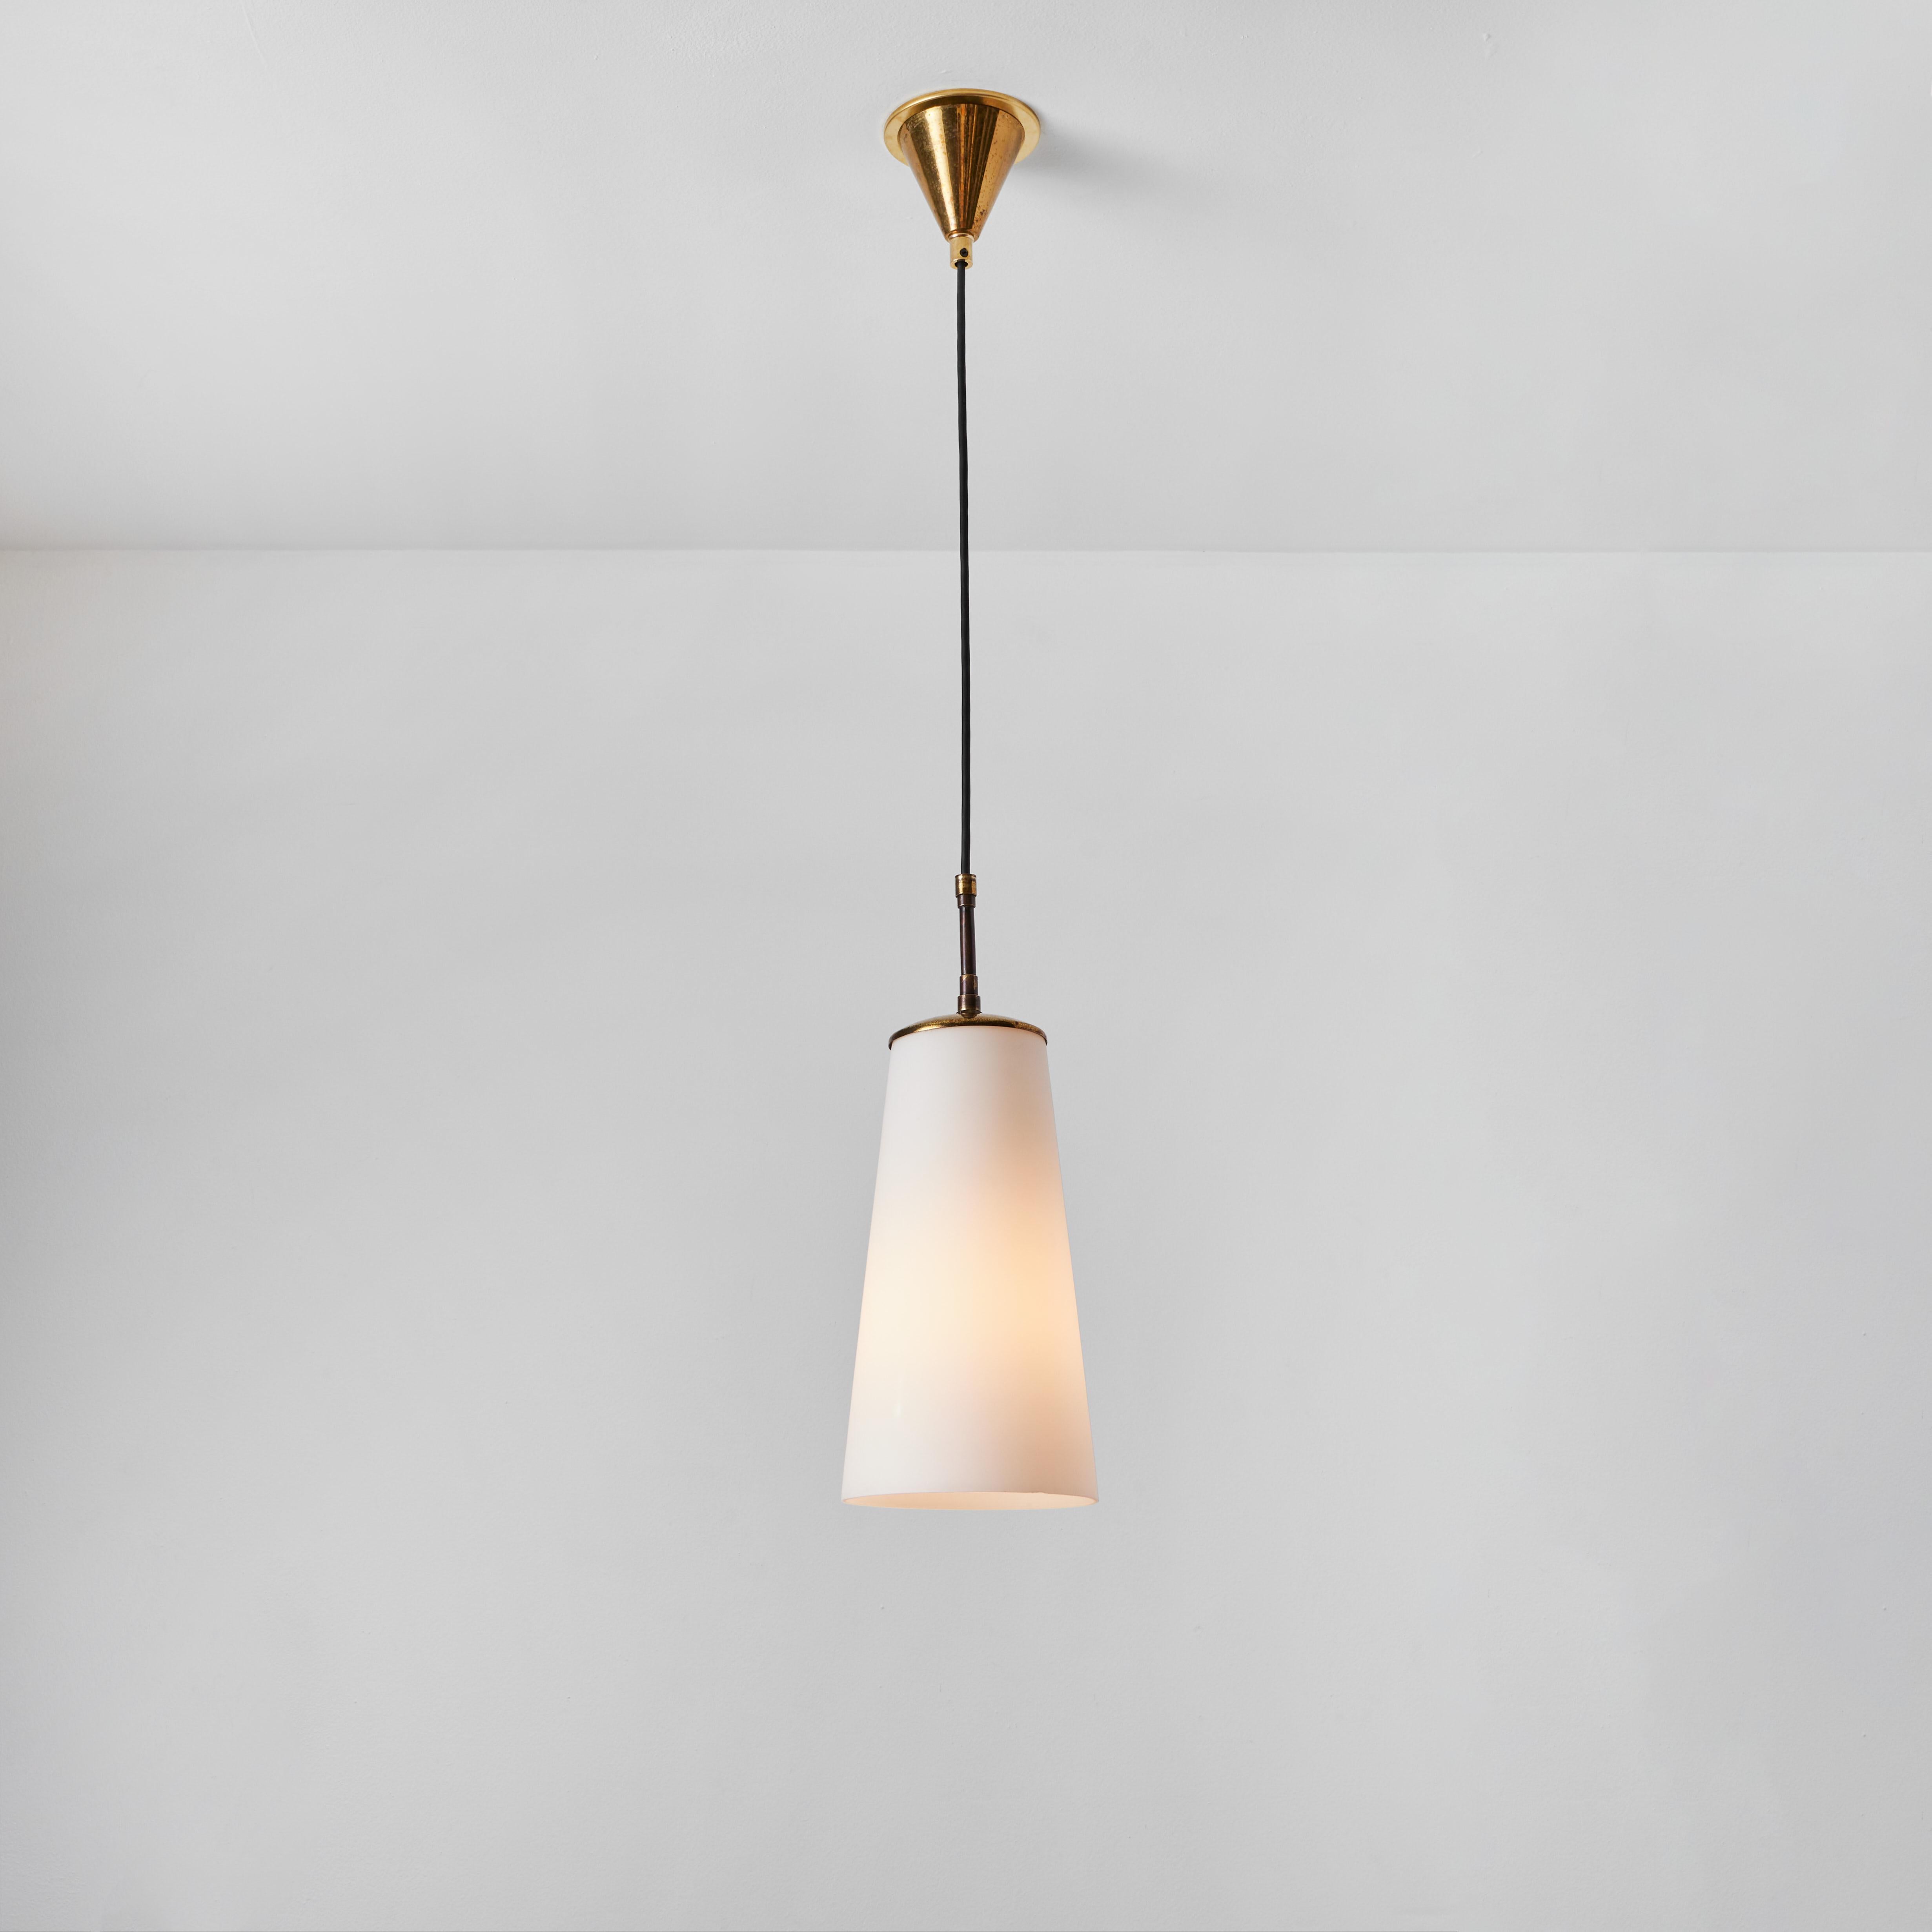 Italian 1950s Brass and Opaline Glass Pendant Lamp Attributed to Stilnovo For Sale